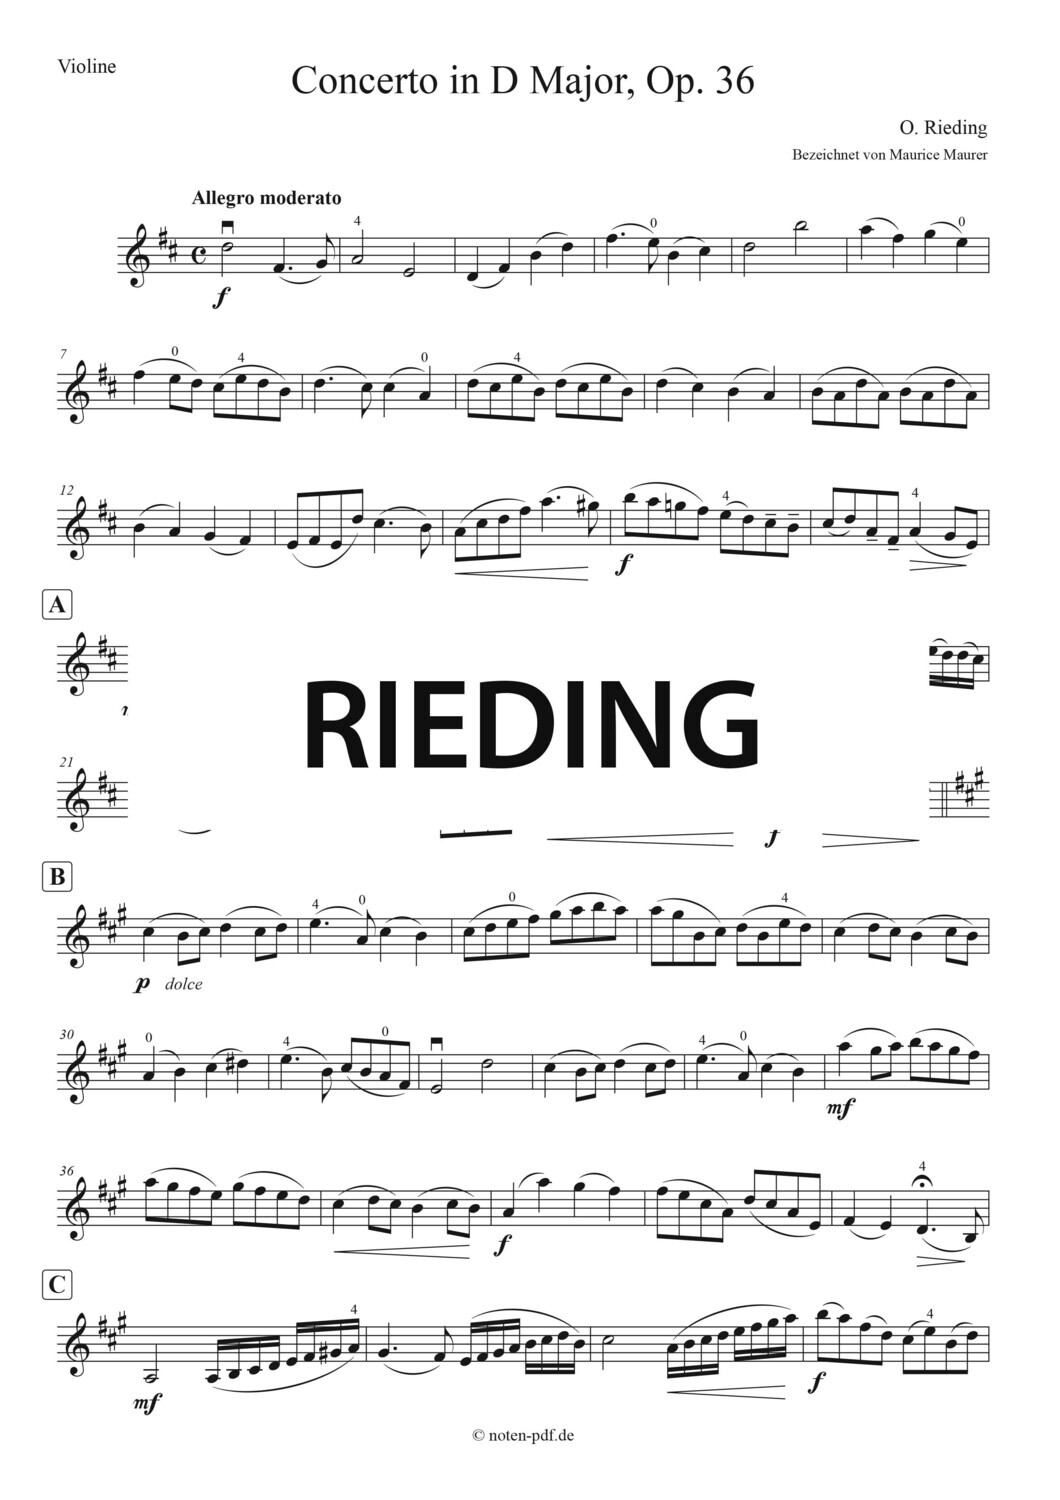 Rieding: Concerto in D Major Op. 36, All Movements